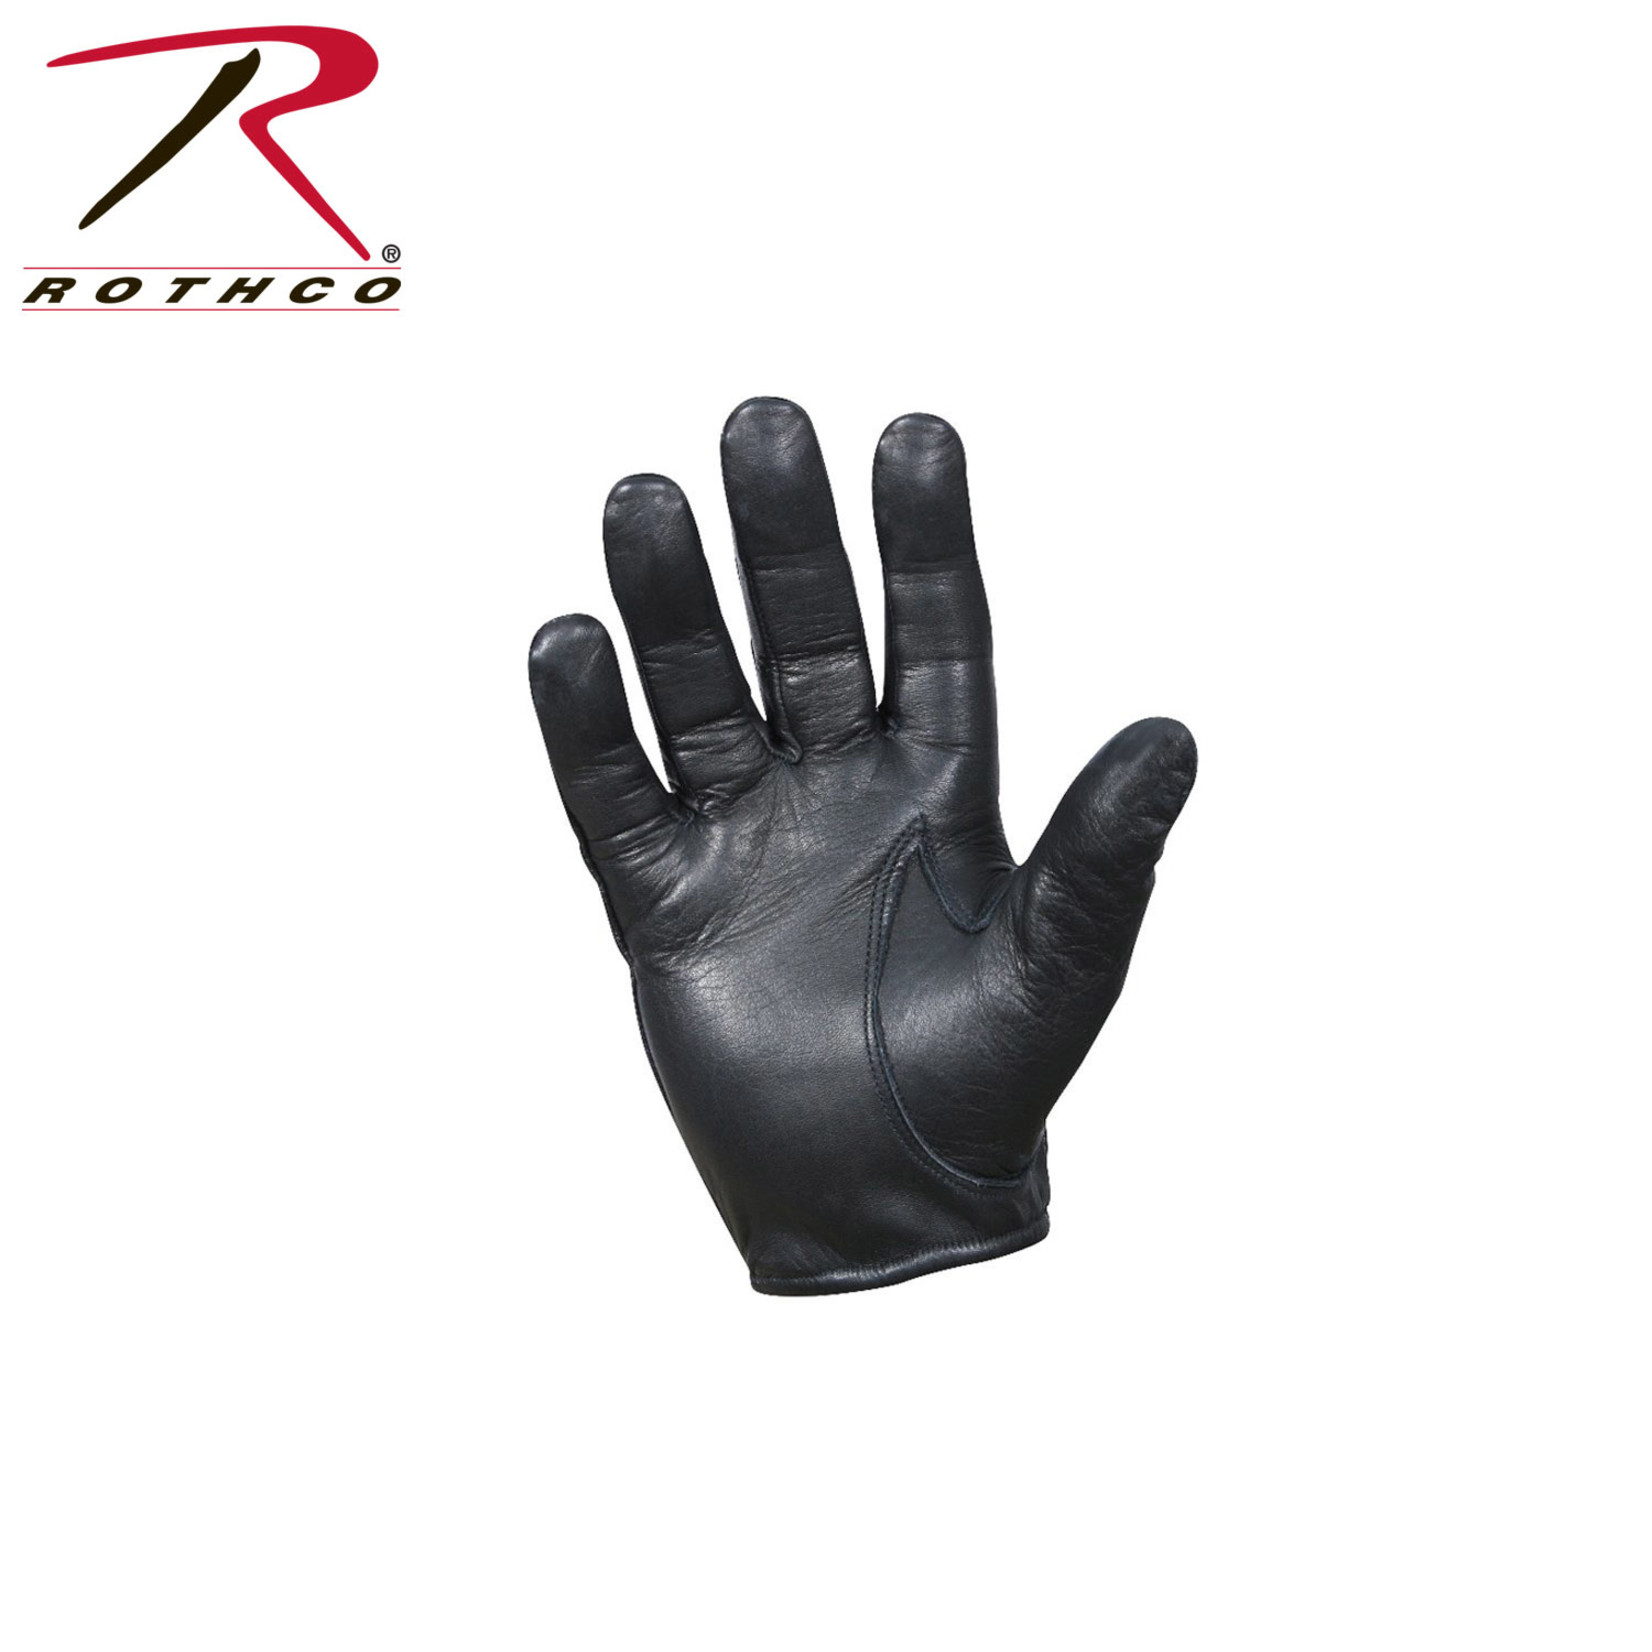 Rothco Rothco Police Cut Resistant Lined Gloves